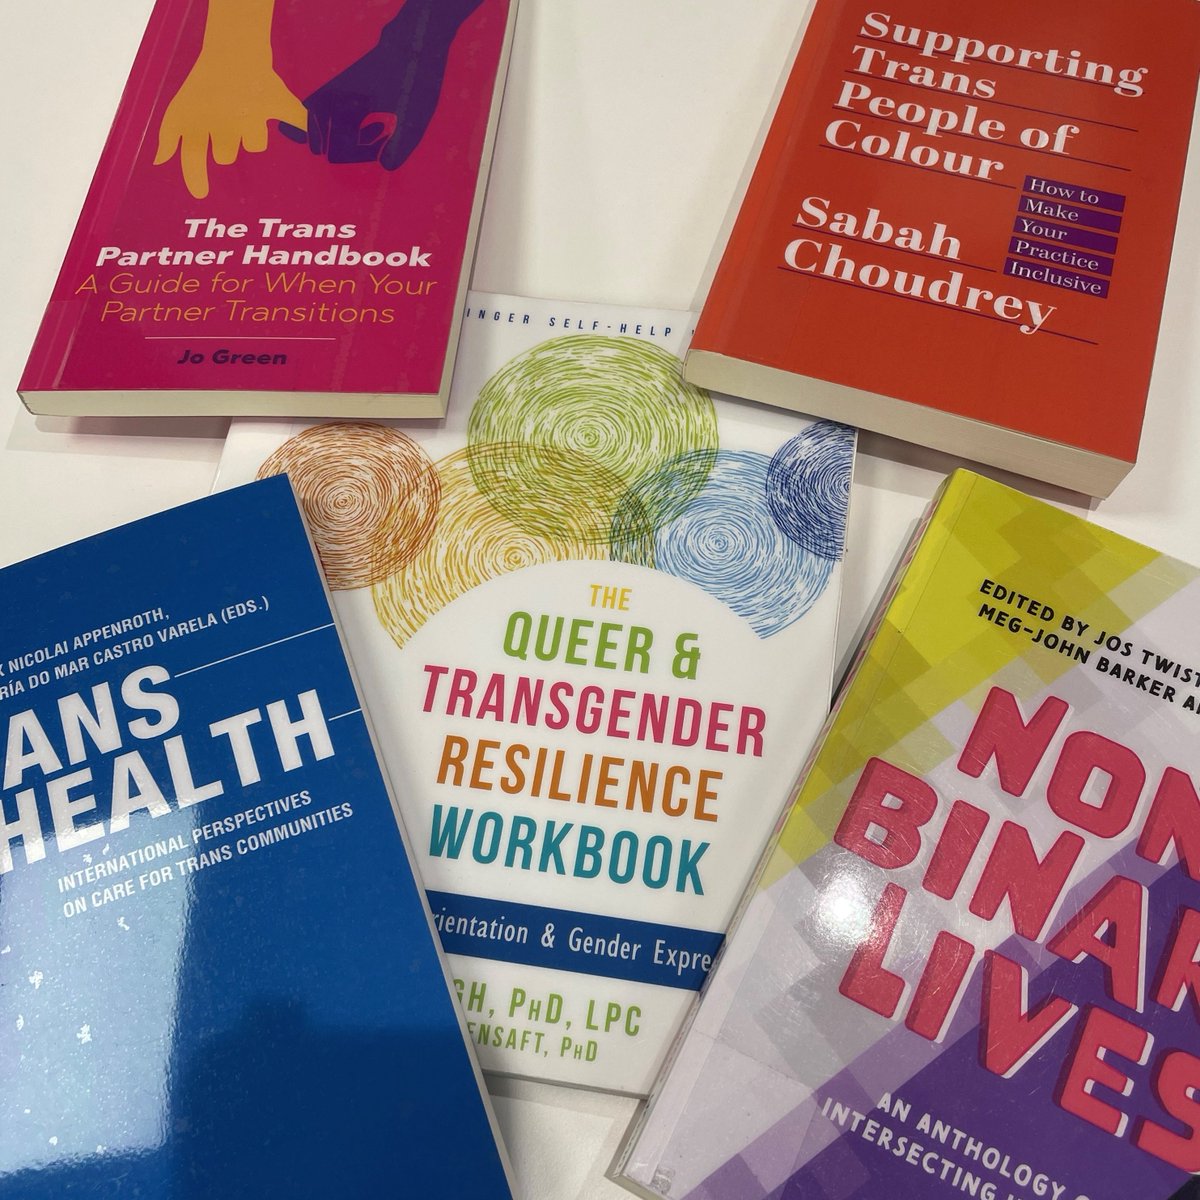 Trans Awareness Week is from 13-19 November 🏳️‍⚧️ We have plenty of books & ebooks on trans health & social care available for loan that will help make your practice more inclusive. To enquire please email us at library@nelft.nhs.uk. #TransAwarenessWeek